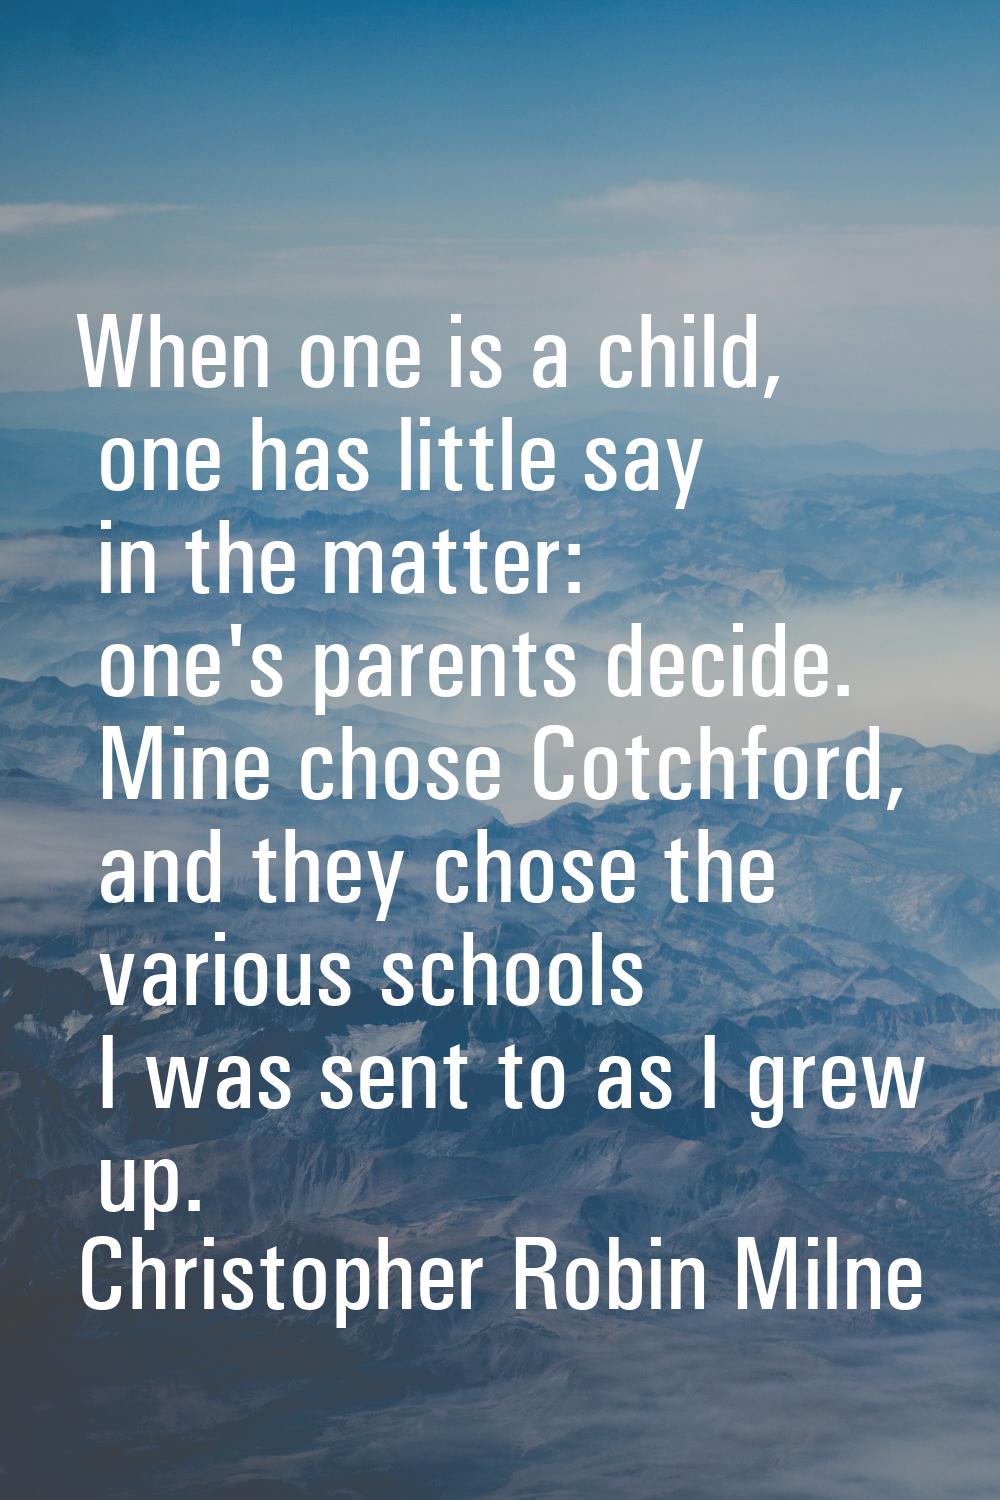 When one is a child, one has little say in the matter: one's parents decide. Mine chose Cotchford, 